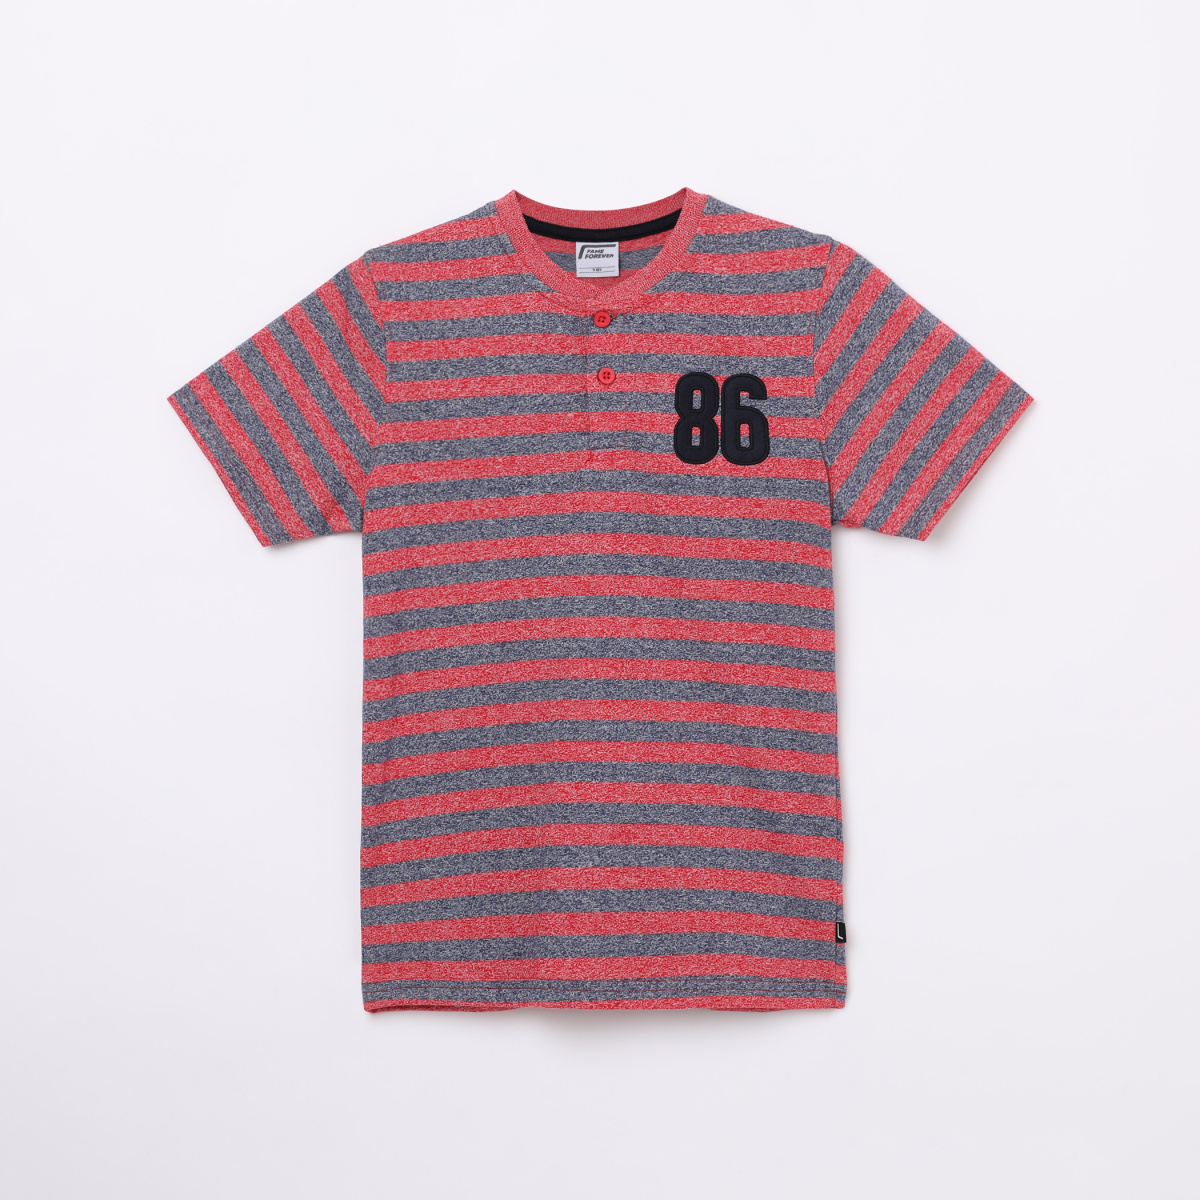 FAME FOREVER YOUNG Boys Striped T-shirt